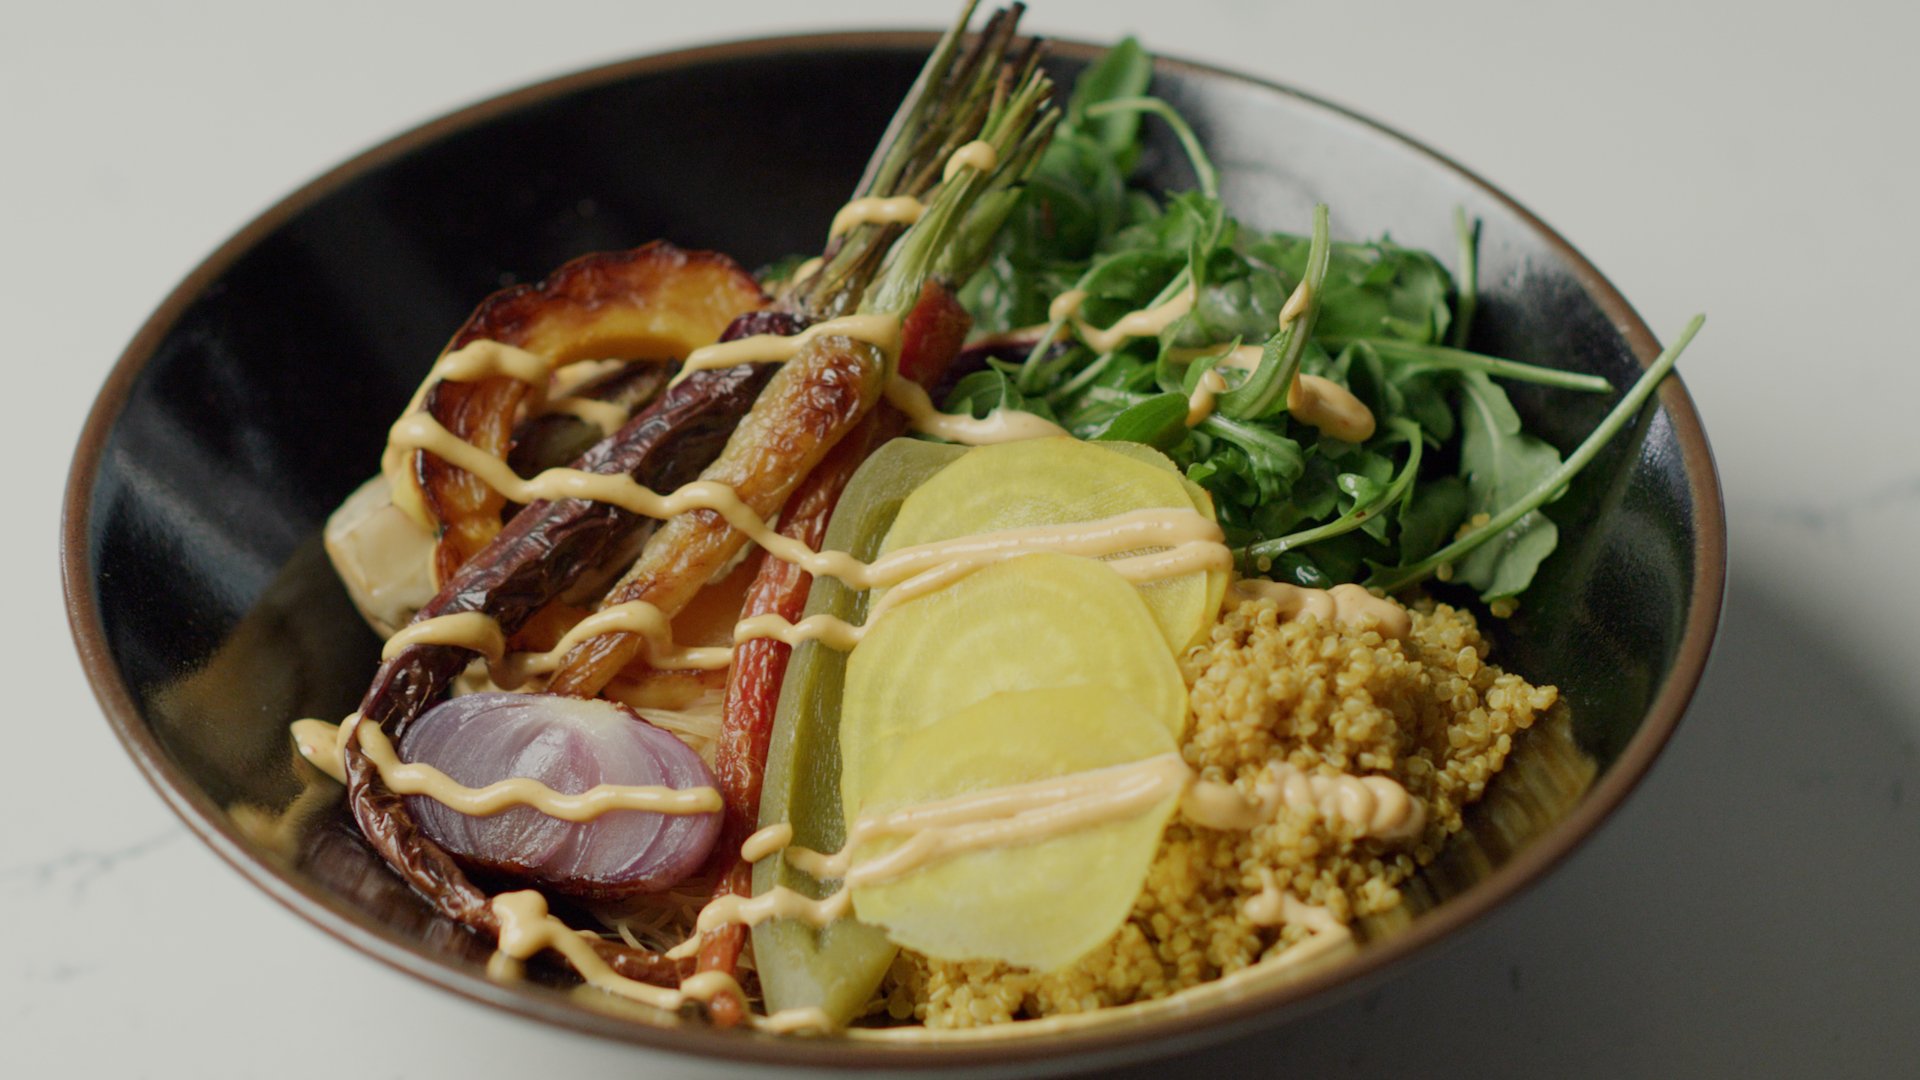 Rice Noodle Bowl with Roasted Vegetables and Curried Quinoa